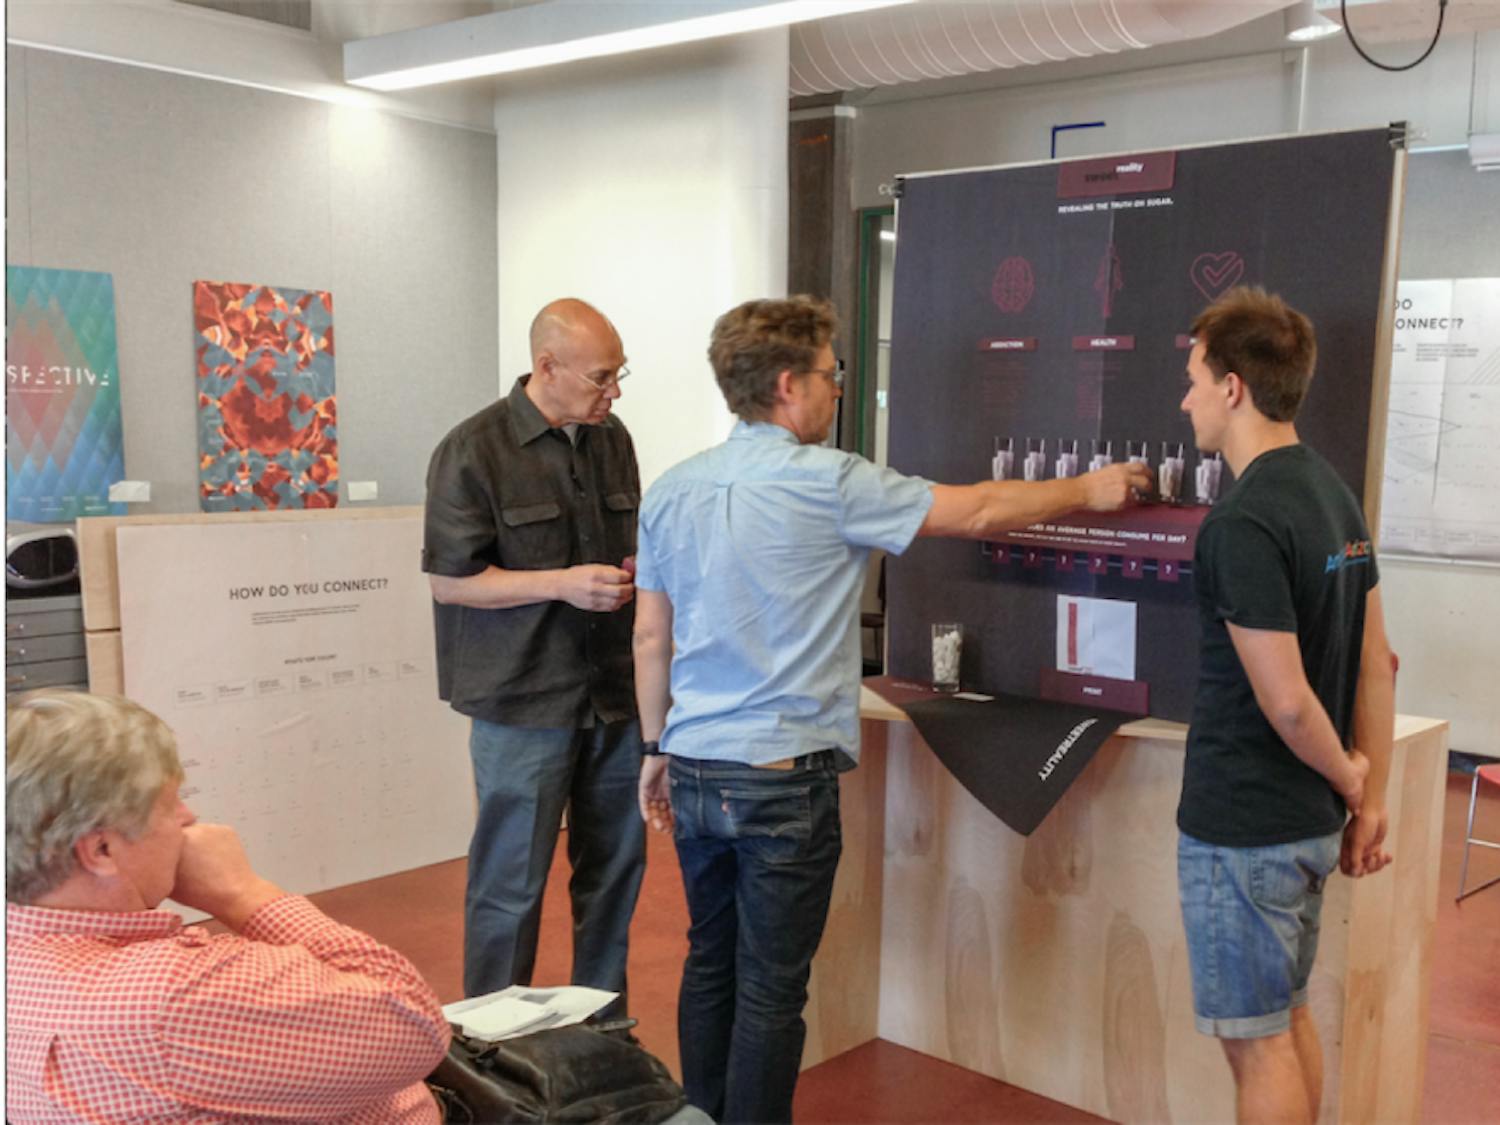 Pictured above: Professors Alfred Sanft (left) and Eric Montgomery (right) are critiquing Maxim Golberg’s prototype of his exhibit which aims to inform people about overconsumption of sugar and&nbsp;its harmful effects.